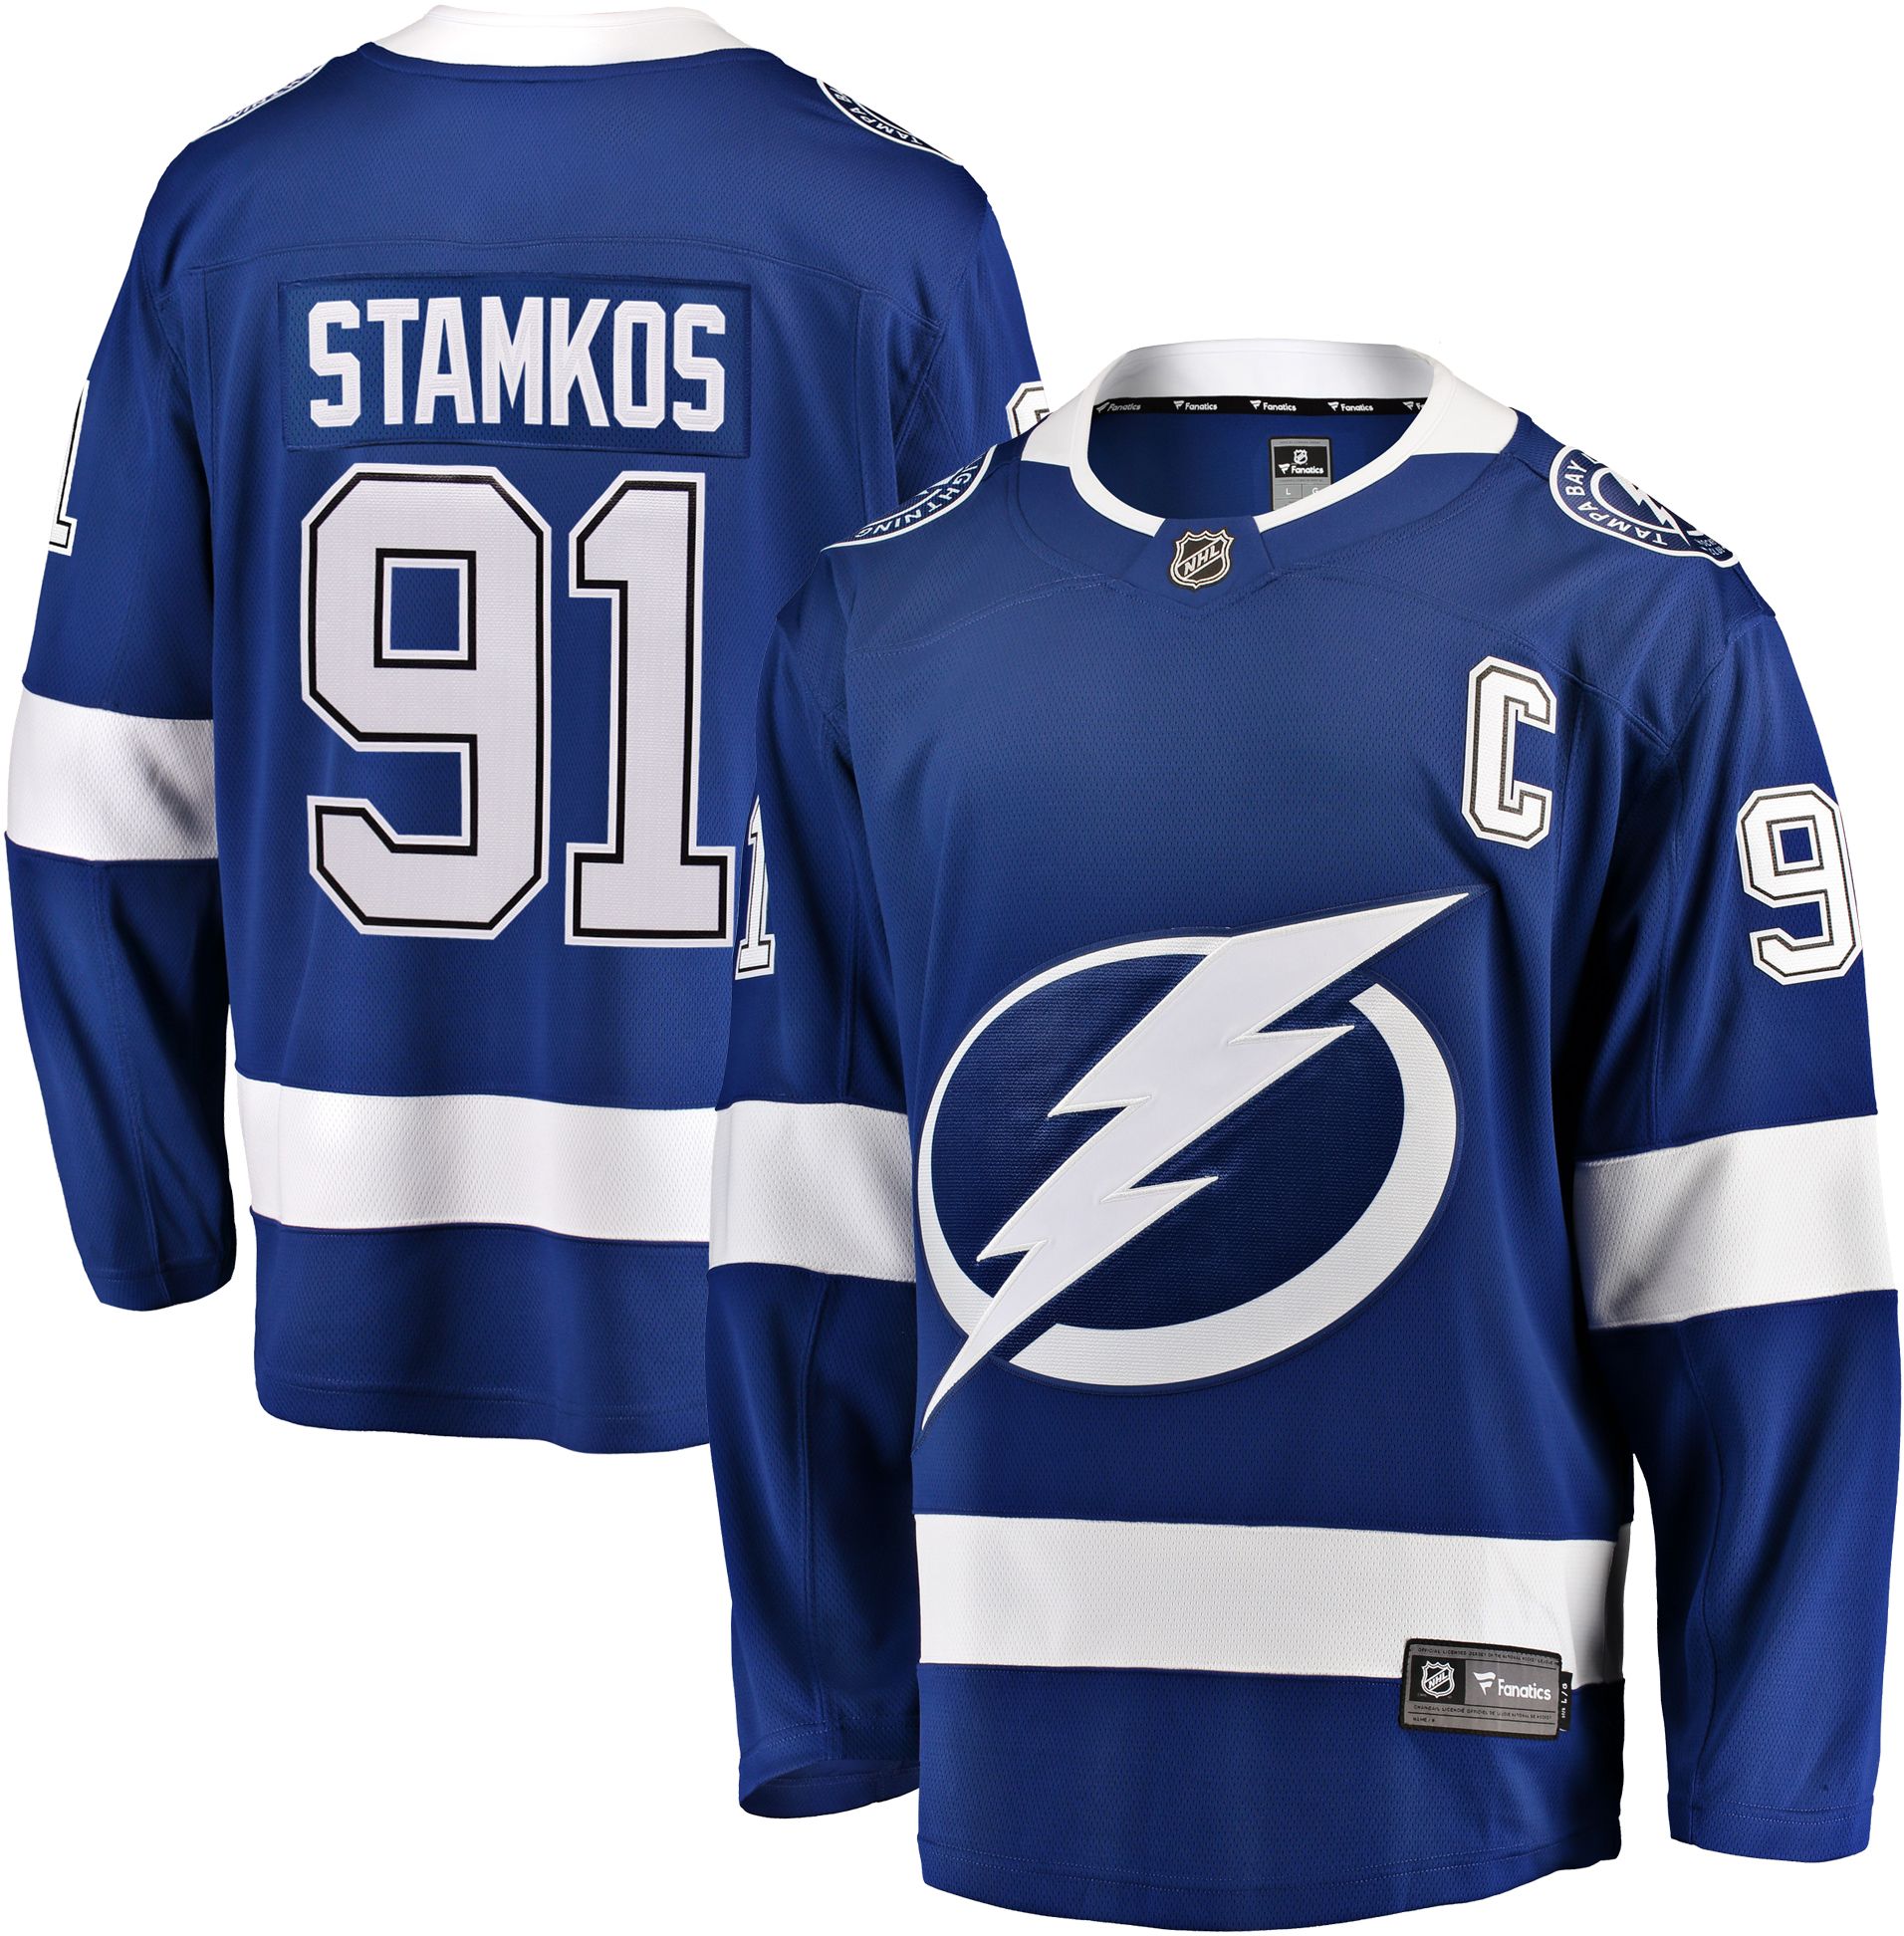 Tampa Bay Lightning No91 Steven Stamkos Royal 2018 All-Star Atlantic Division Authentic Stitched Jersey